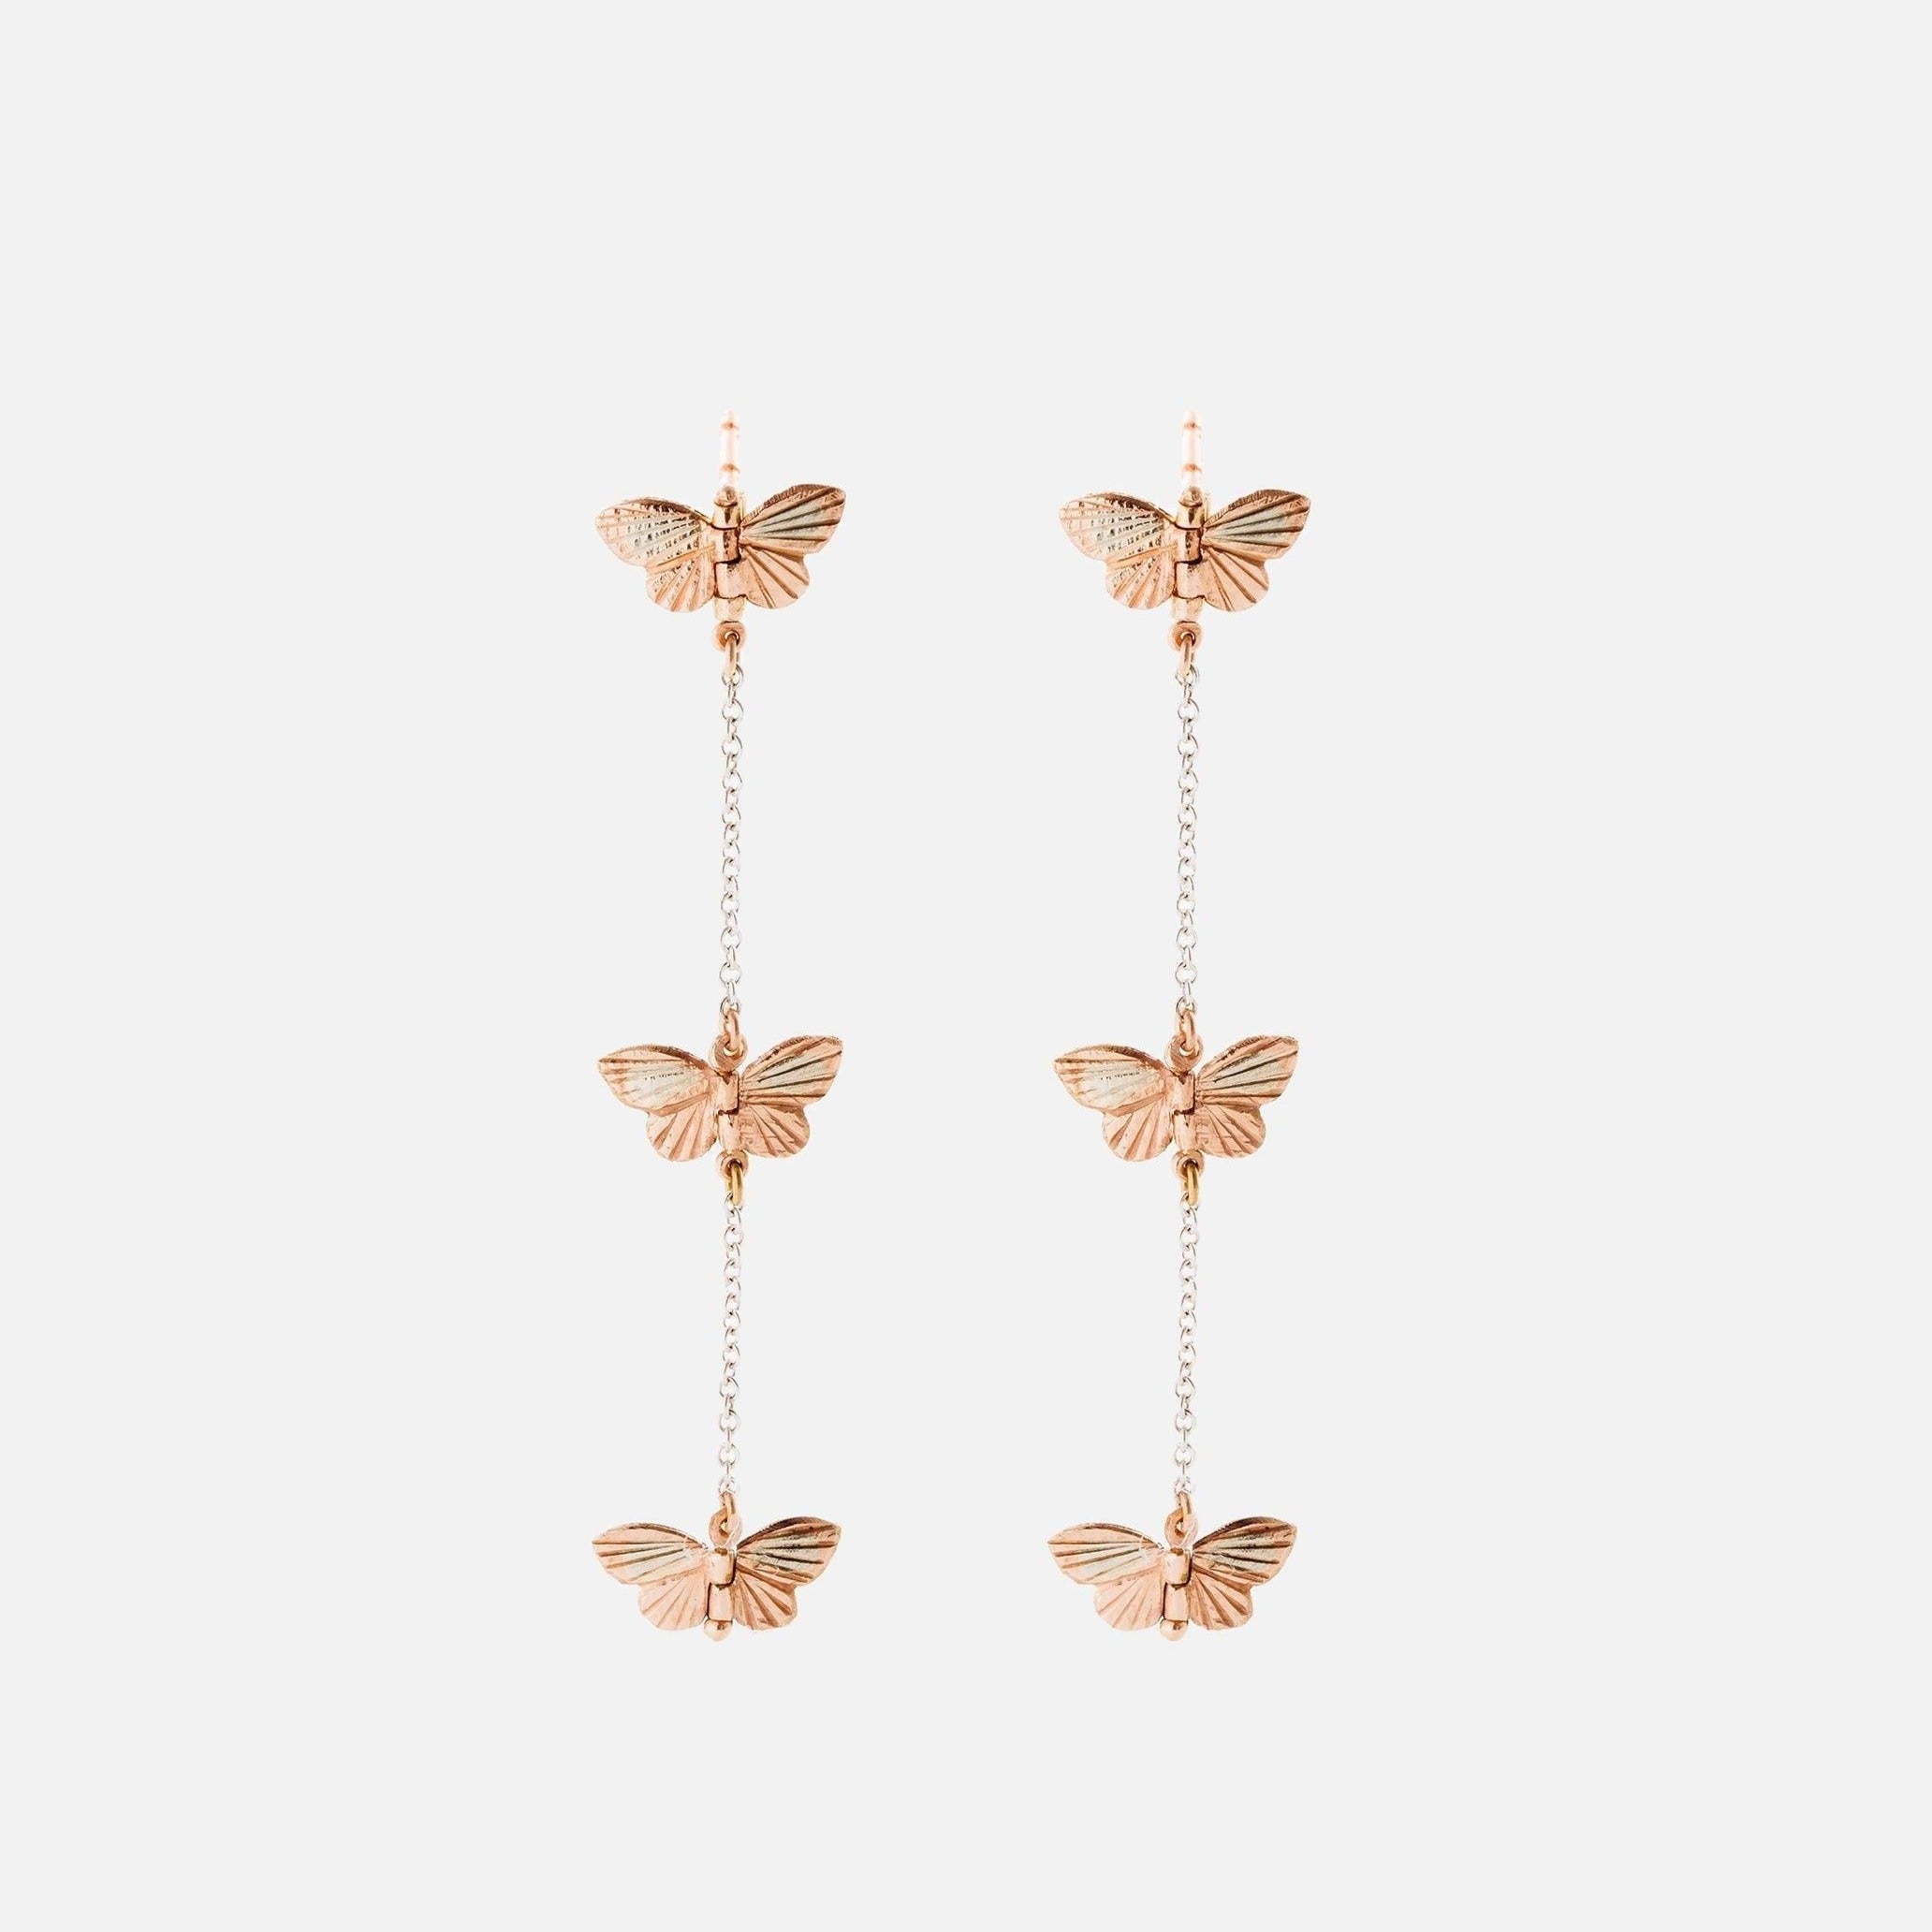 James Banks Design Butterfly Migration Chain Earrings 1